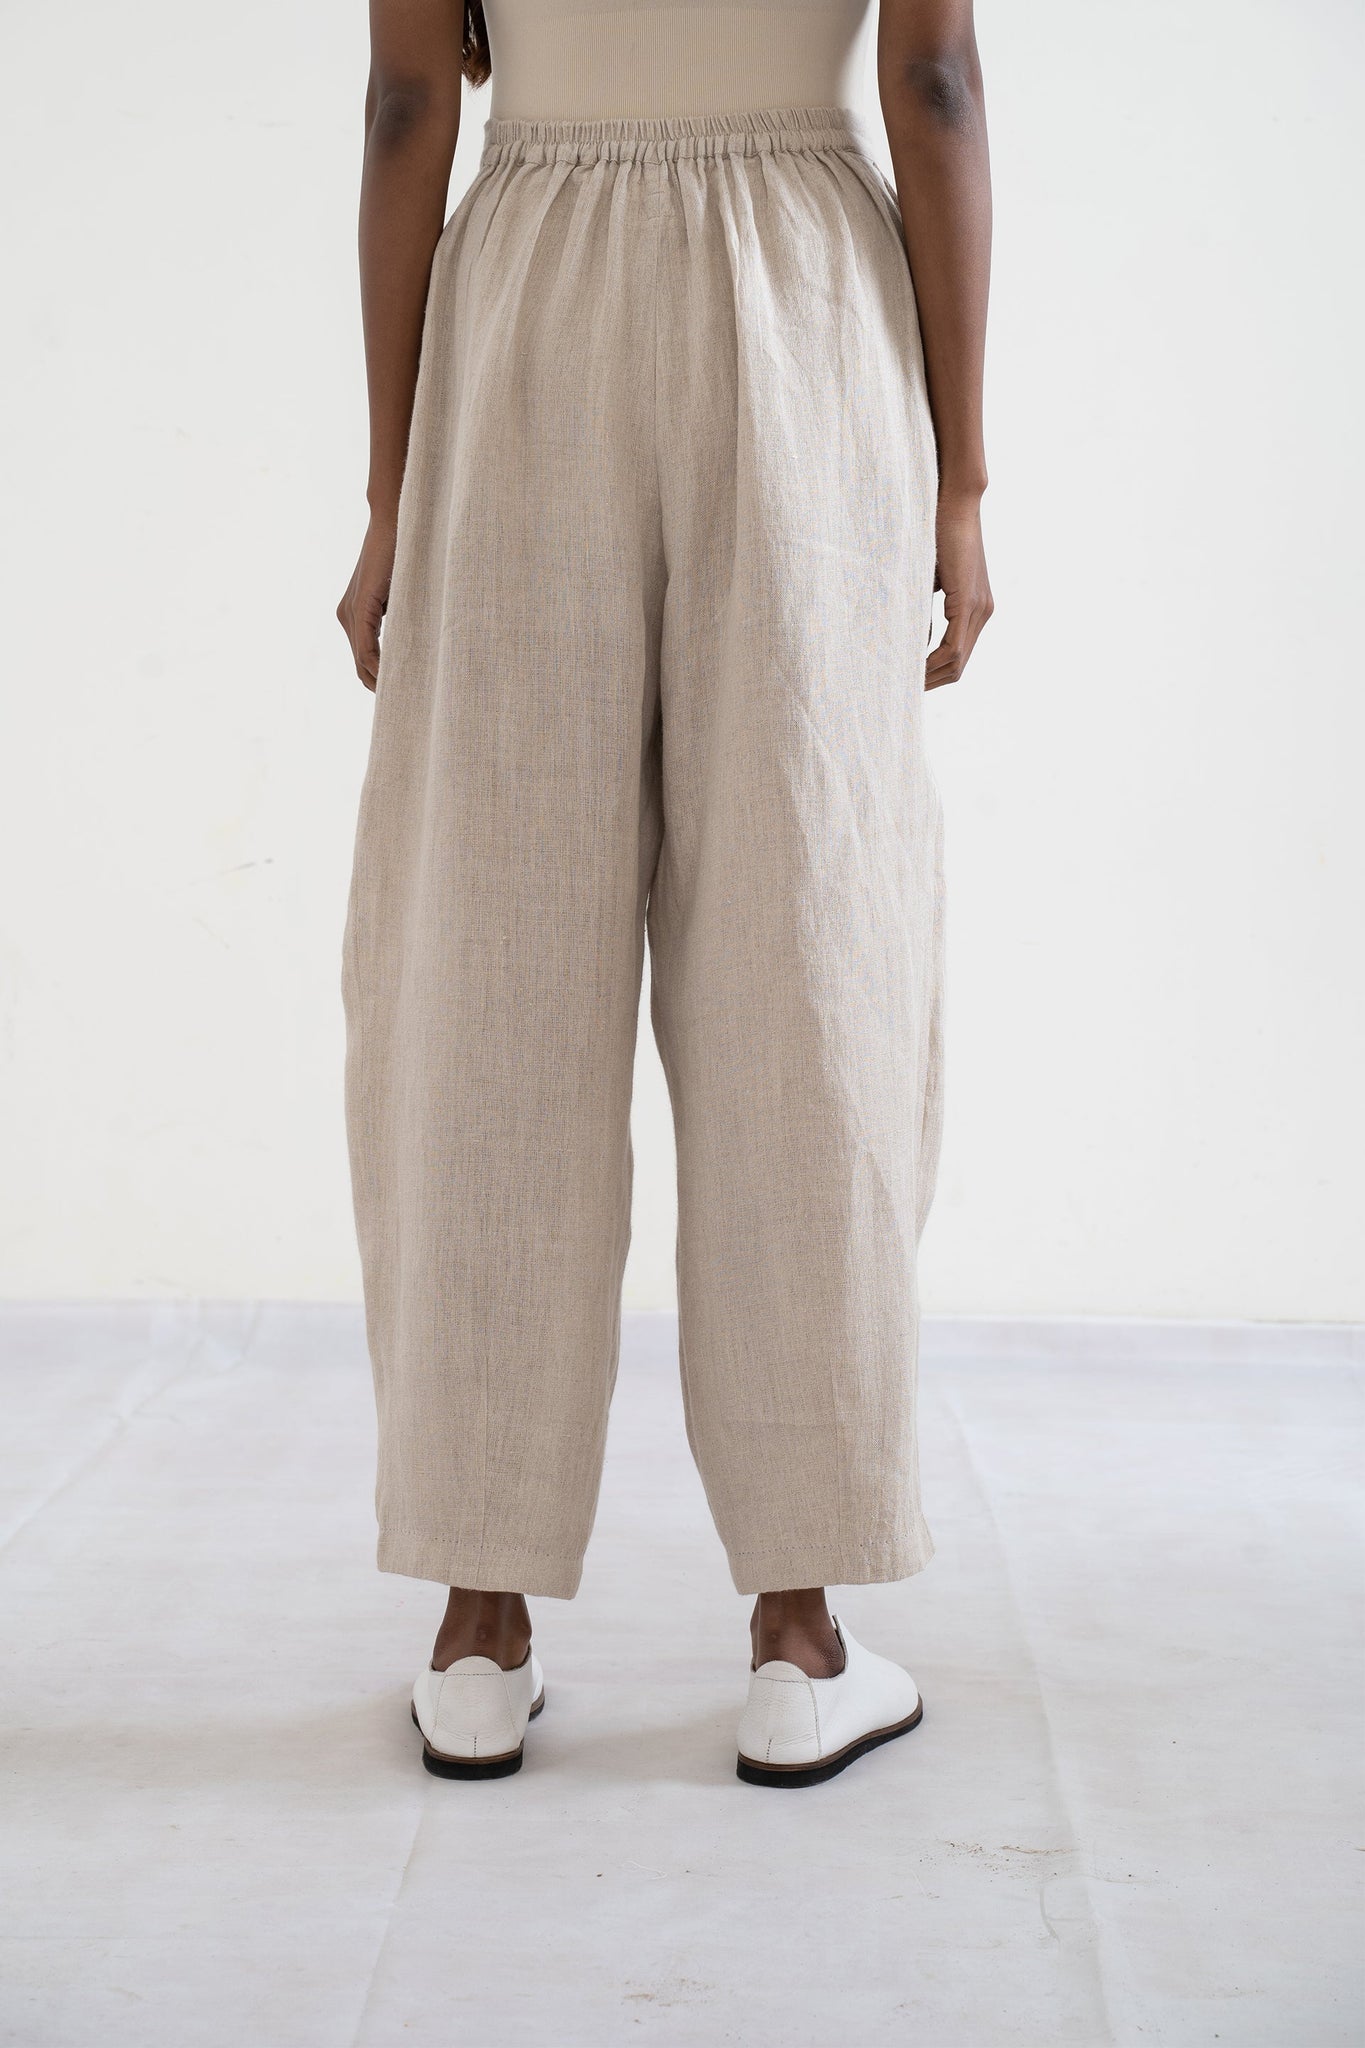 Handwoven Tapered tyra trousers